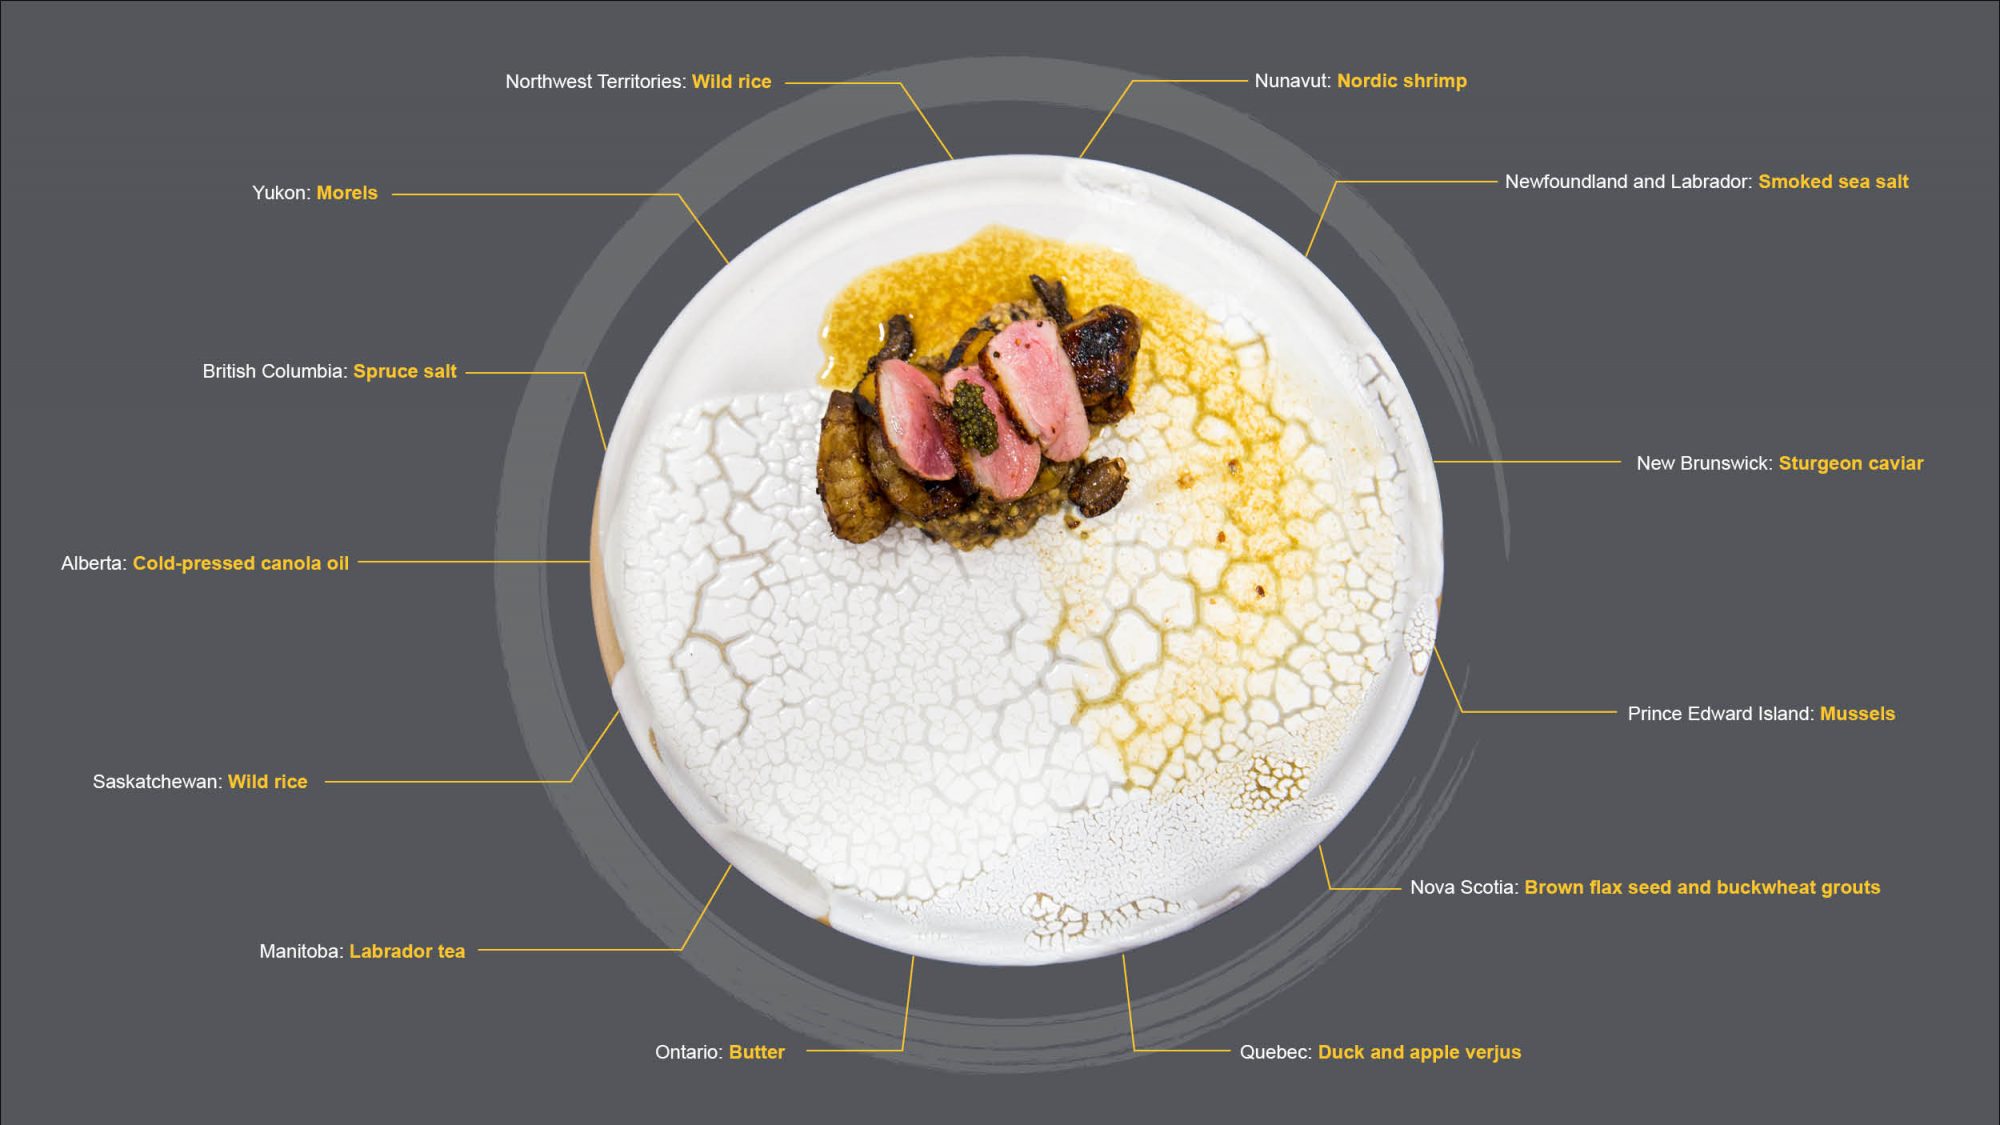 A diagram including an image Chef Josh's plate, with text references to each ingredient and where they are from. Ingredient lists at the bottom of the webpage.